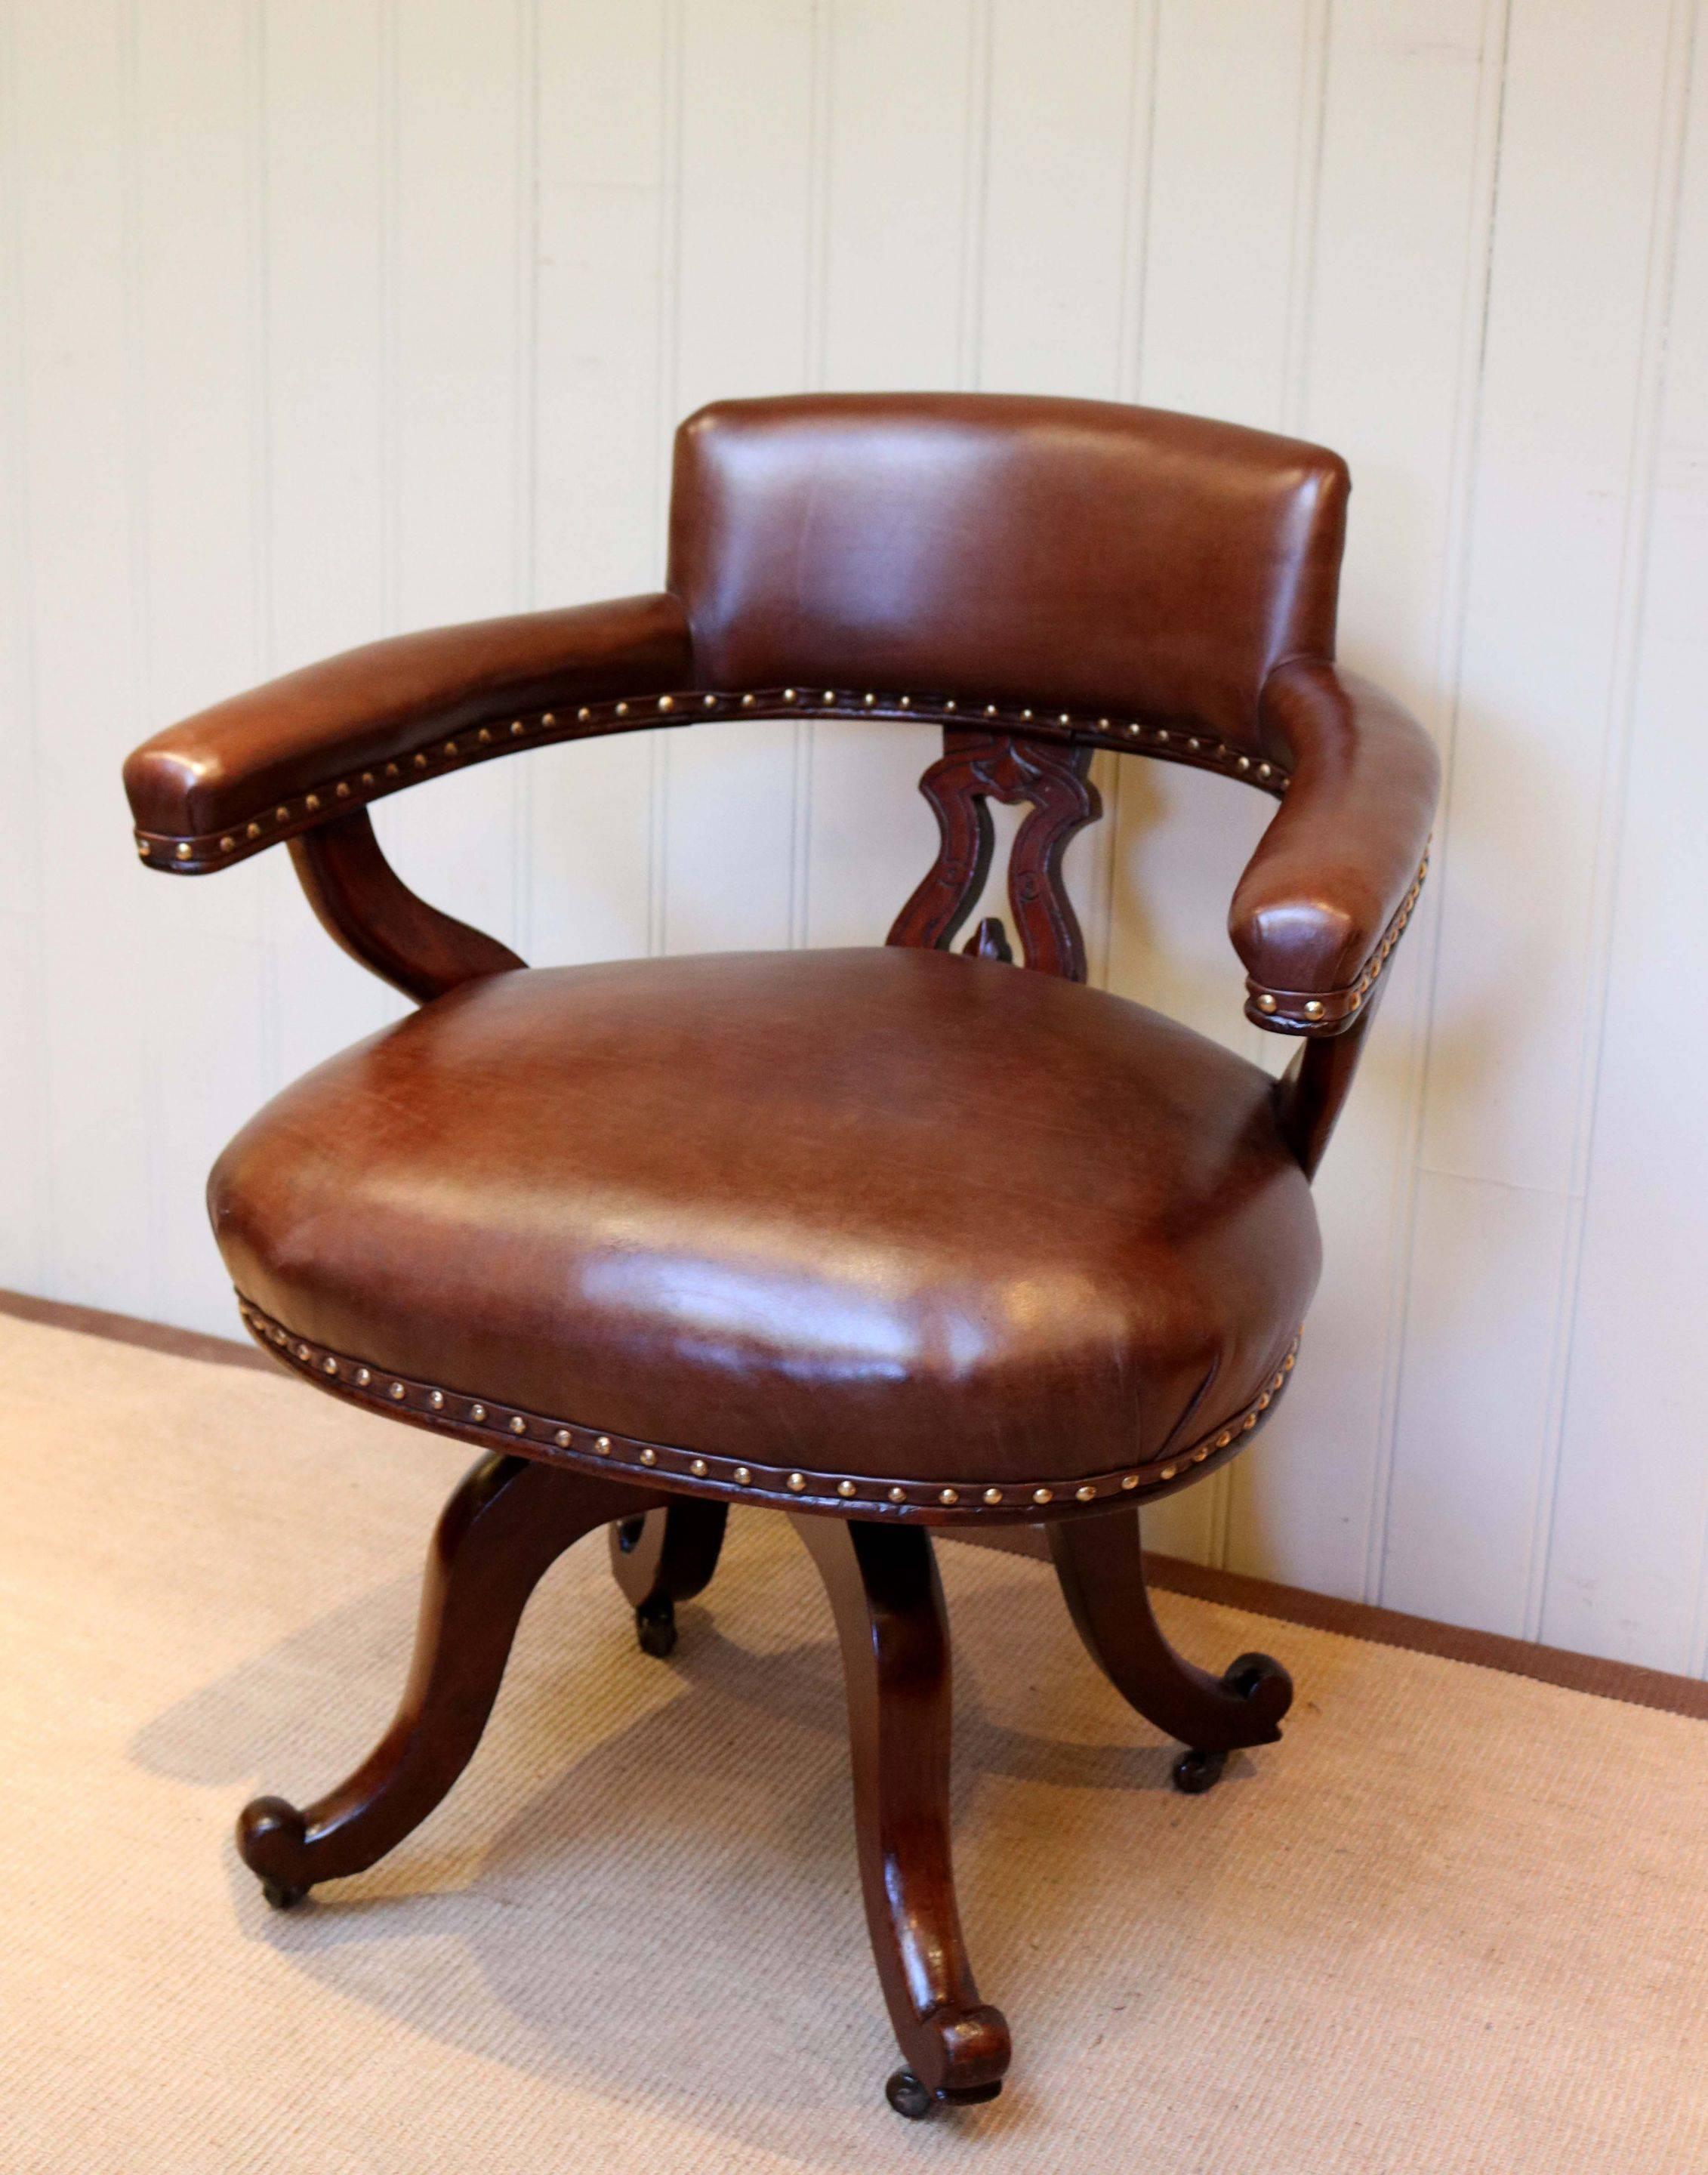 Victorian mahogany and leather desk chair with a nicely carved back support and upholstered arm rests on a swivel quadraform base with ceramic castors, reupholstered in high grade leather with brass studs.